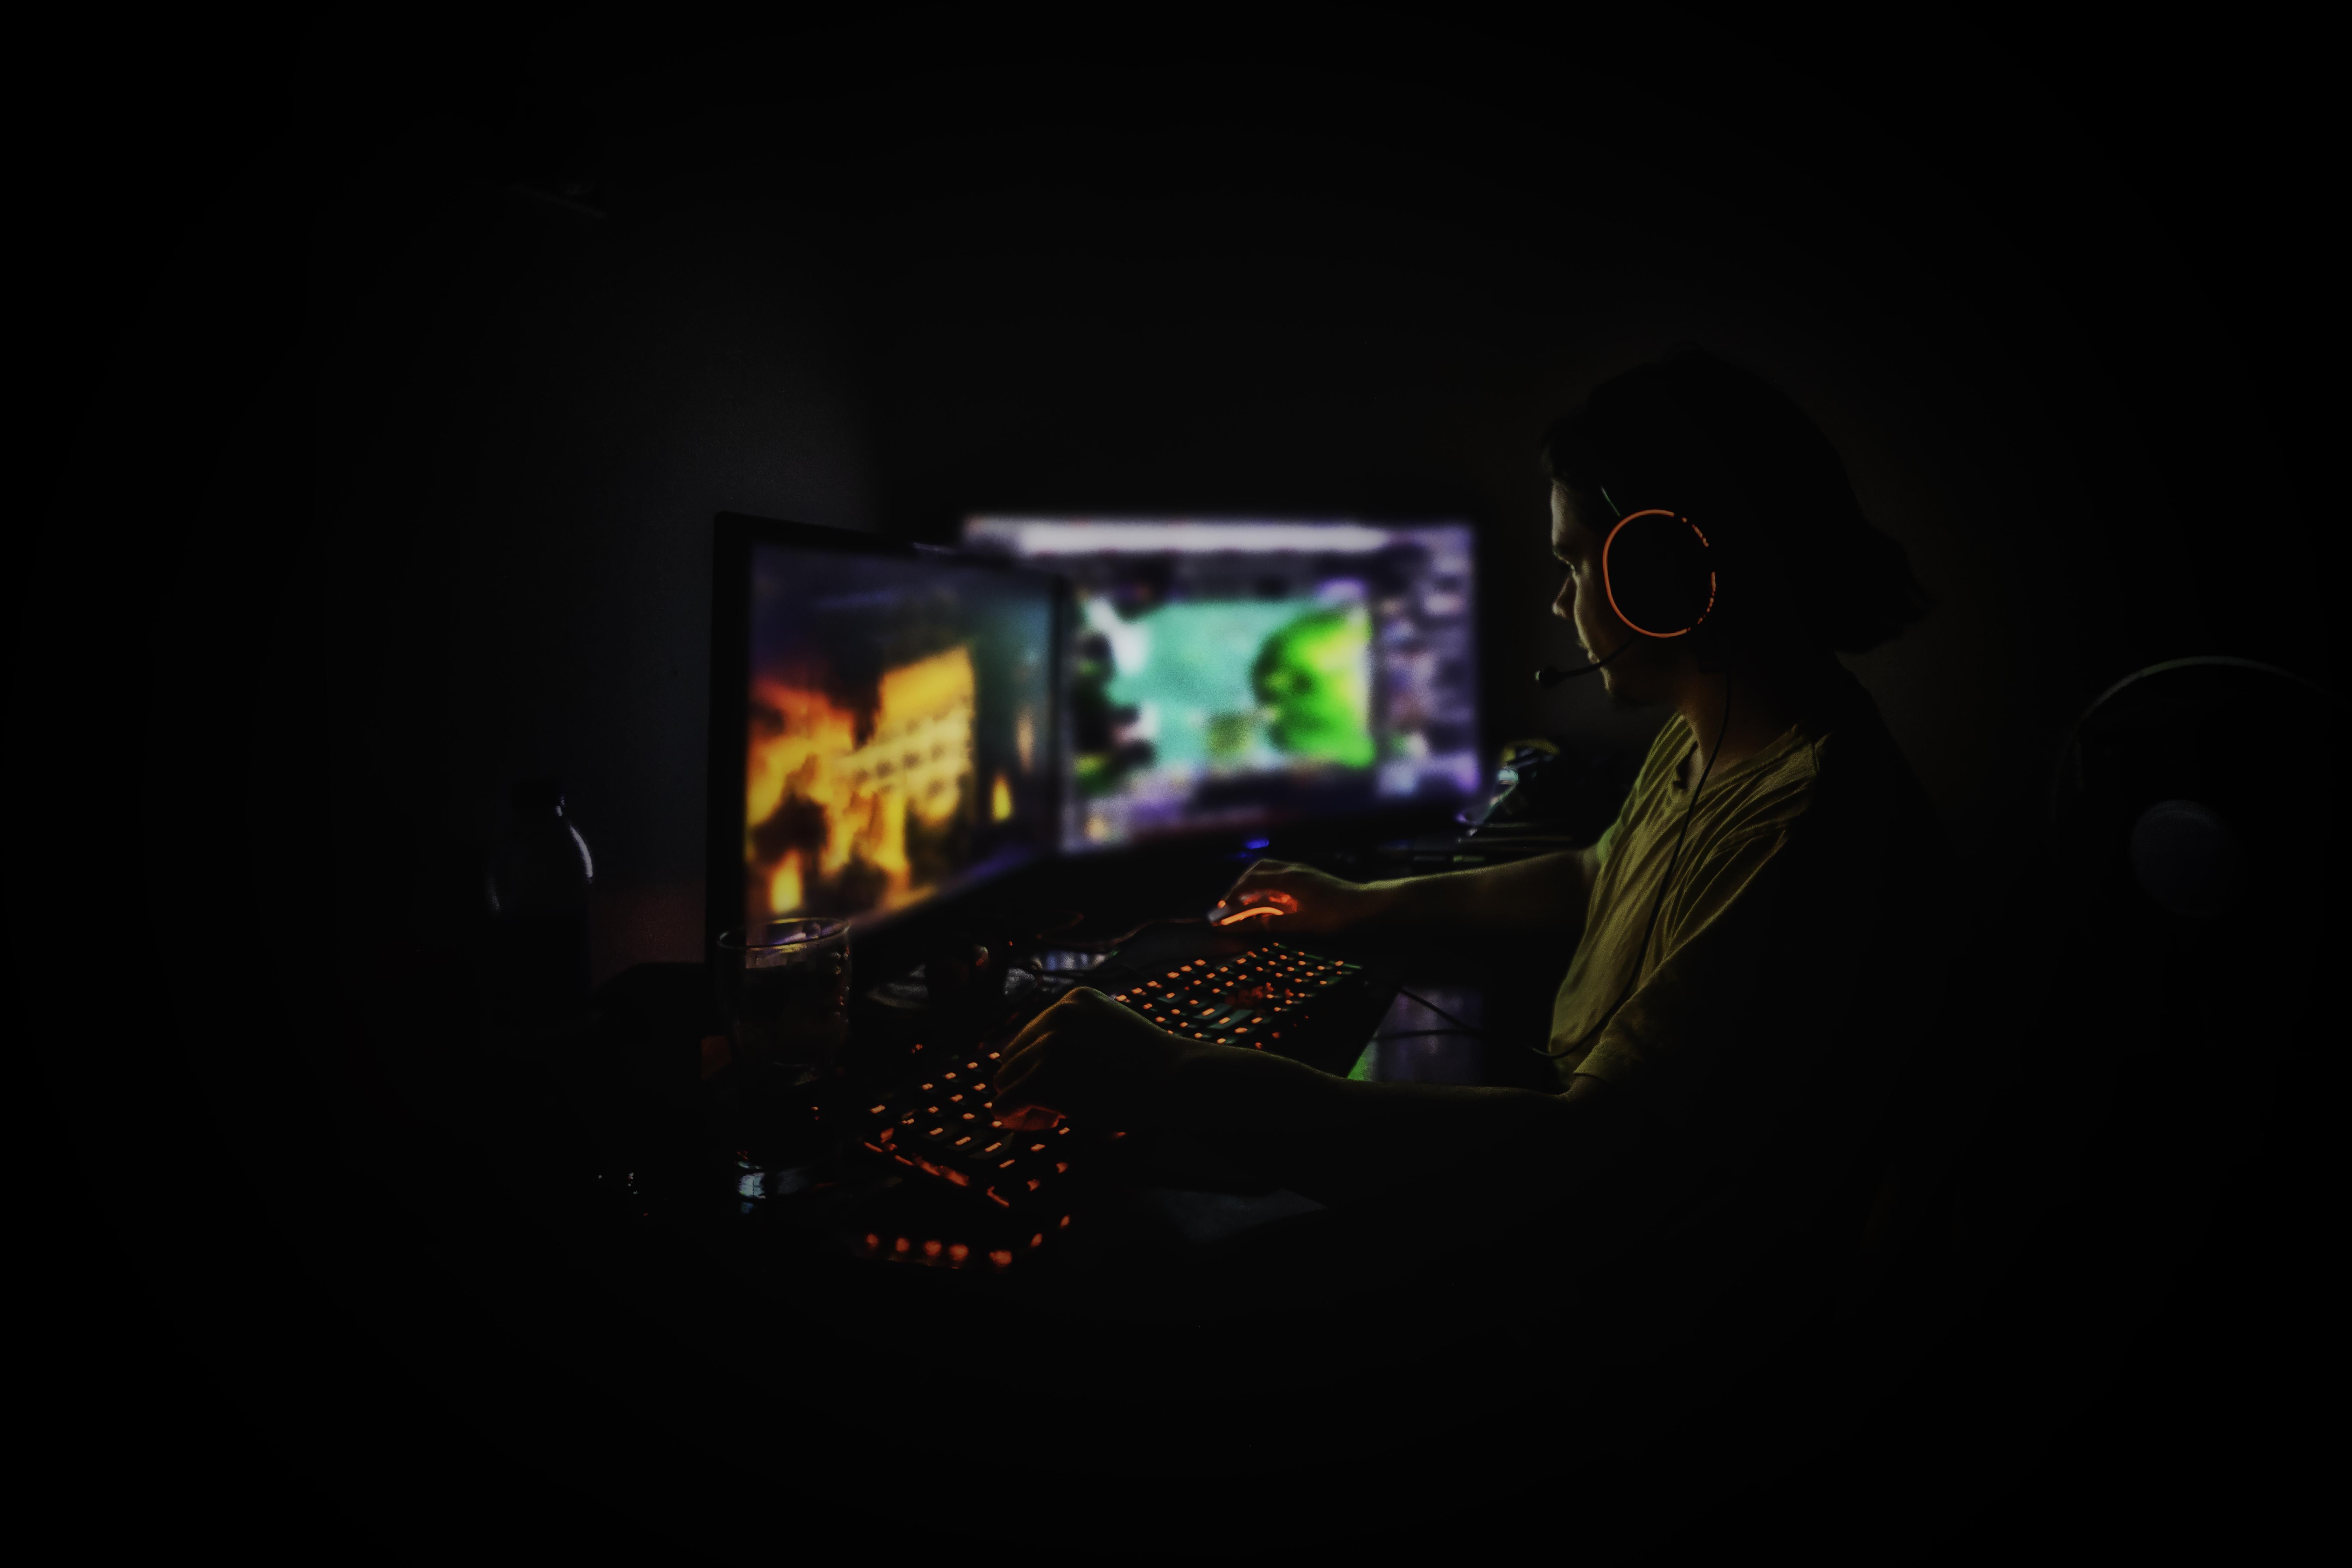 A man wearing a headset is seen in a dark room playing video games